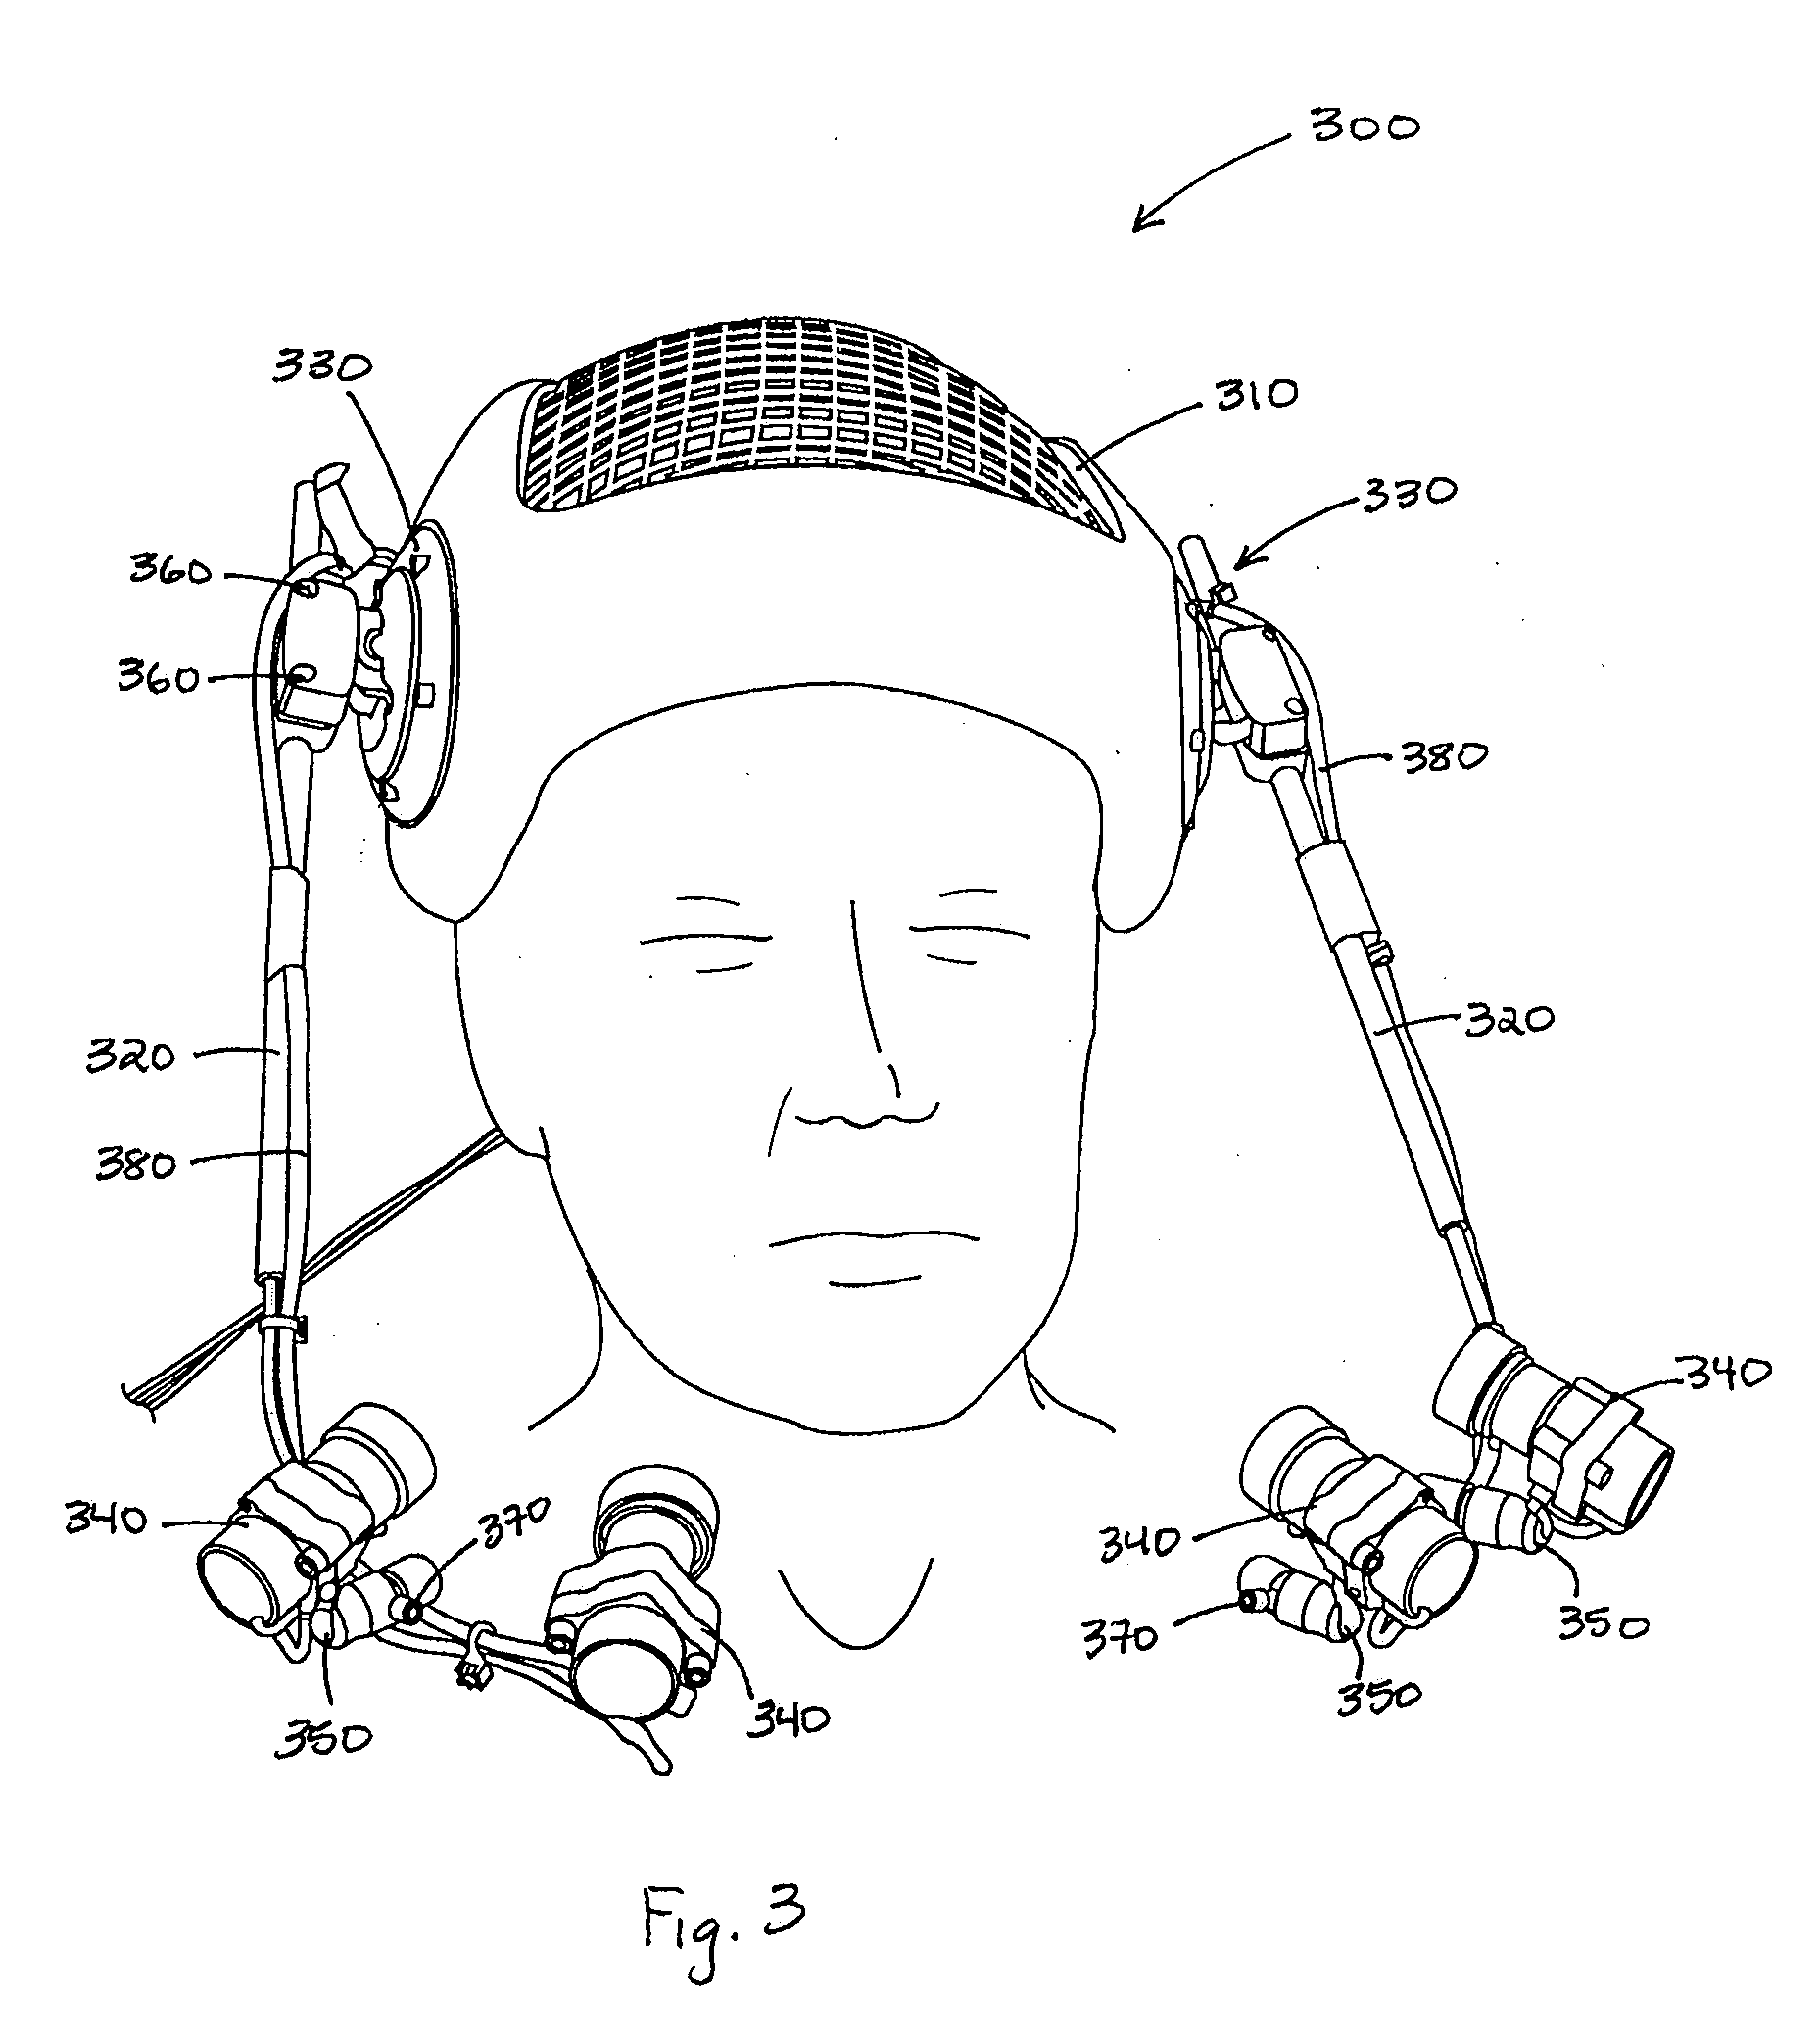 Mounting and bracket for an actor-mounted motion capture camera system